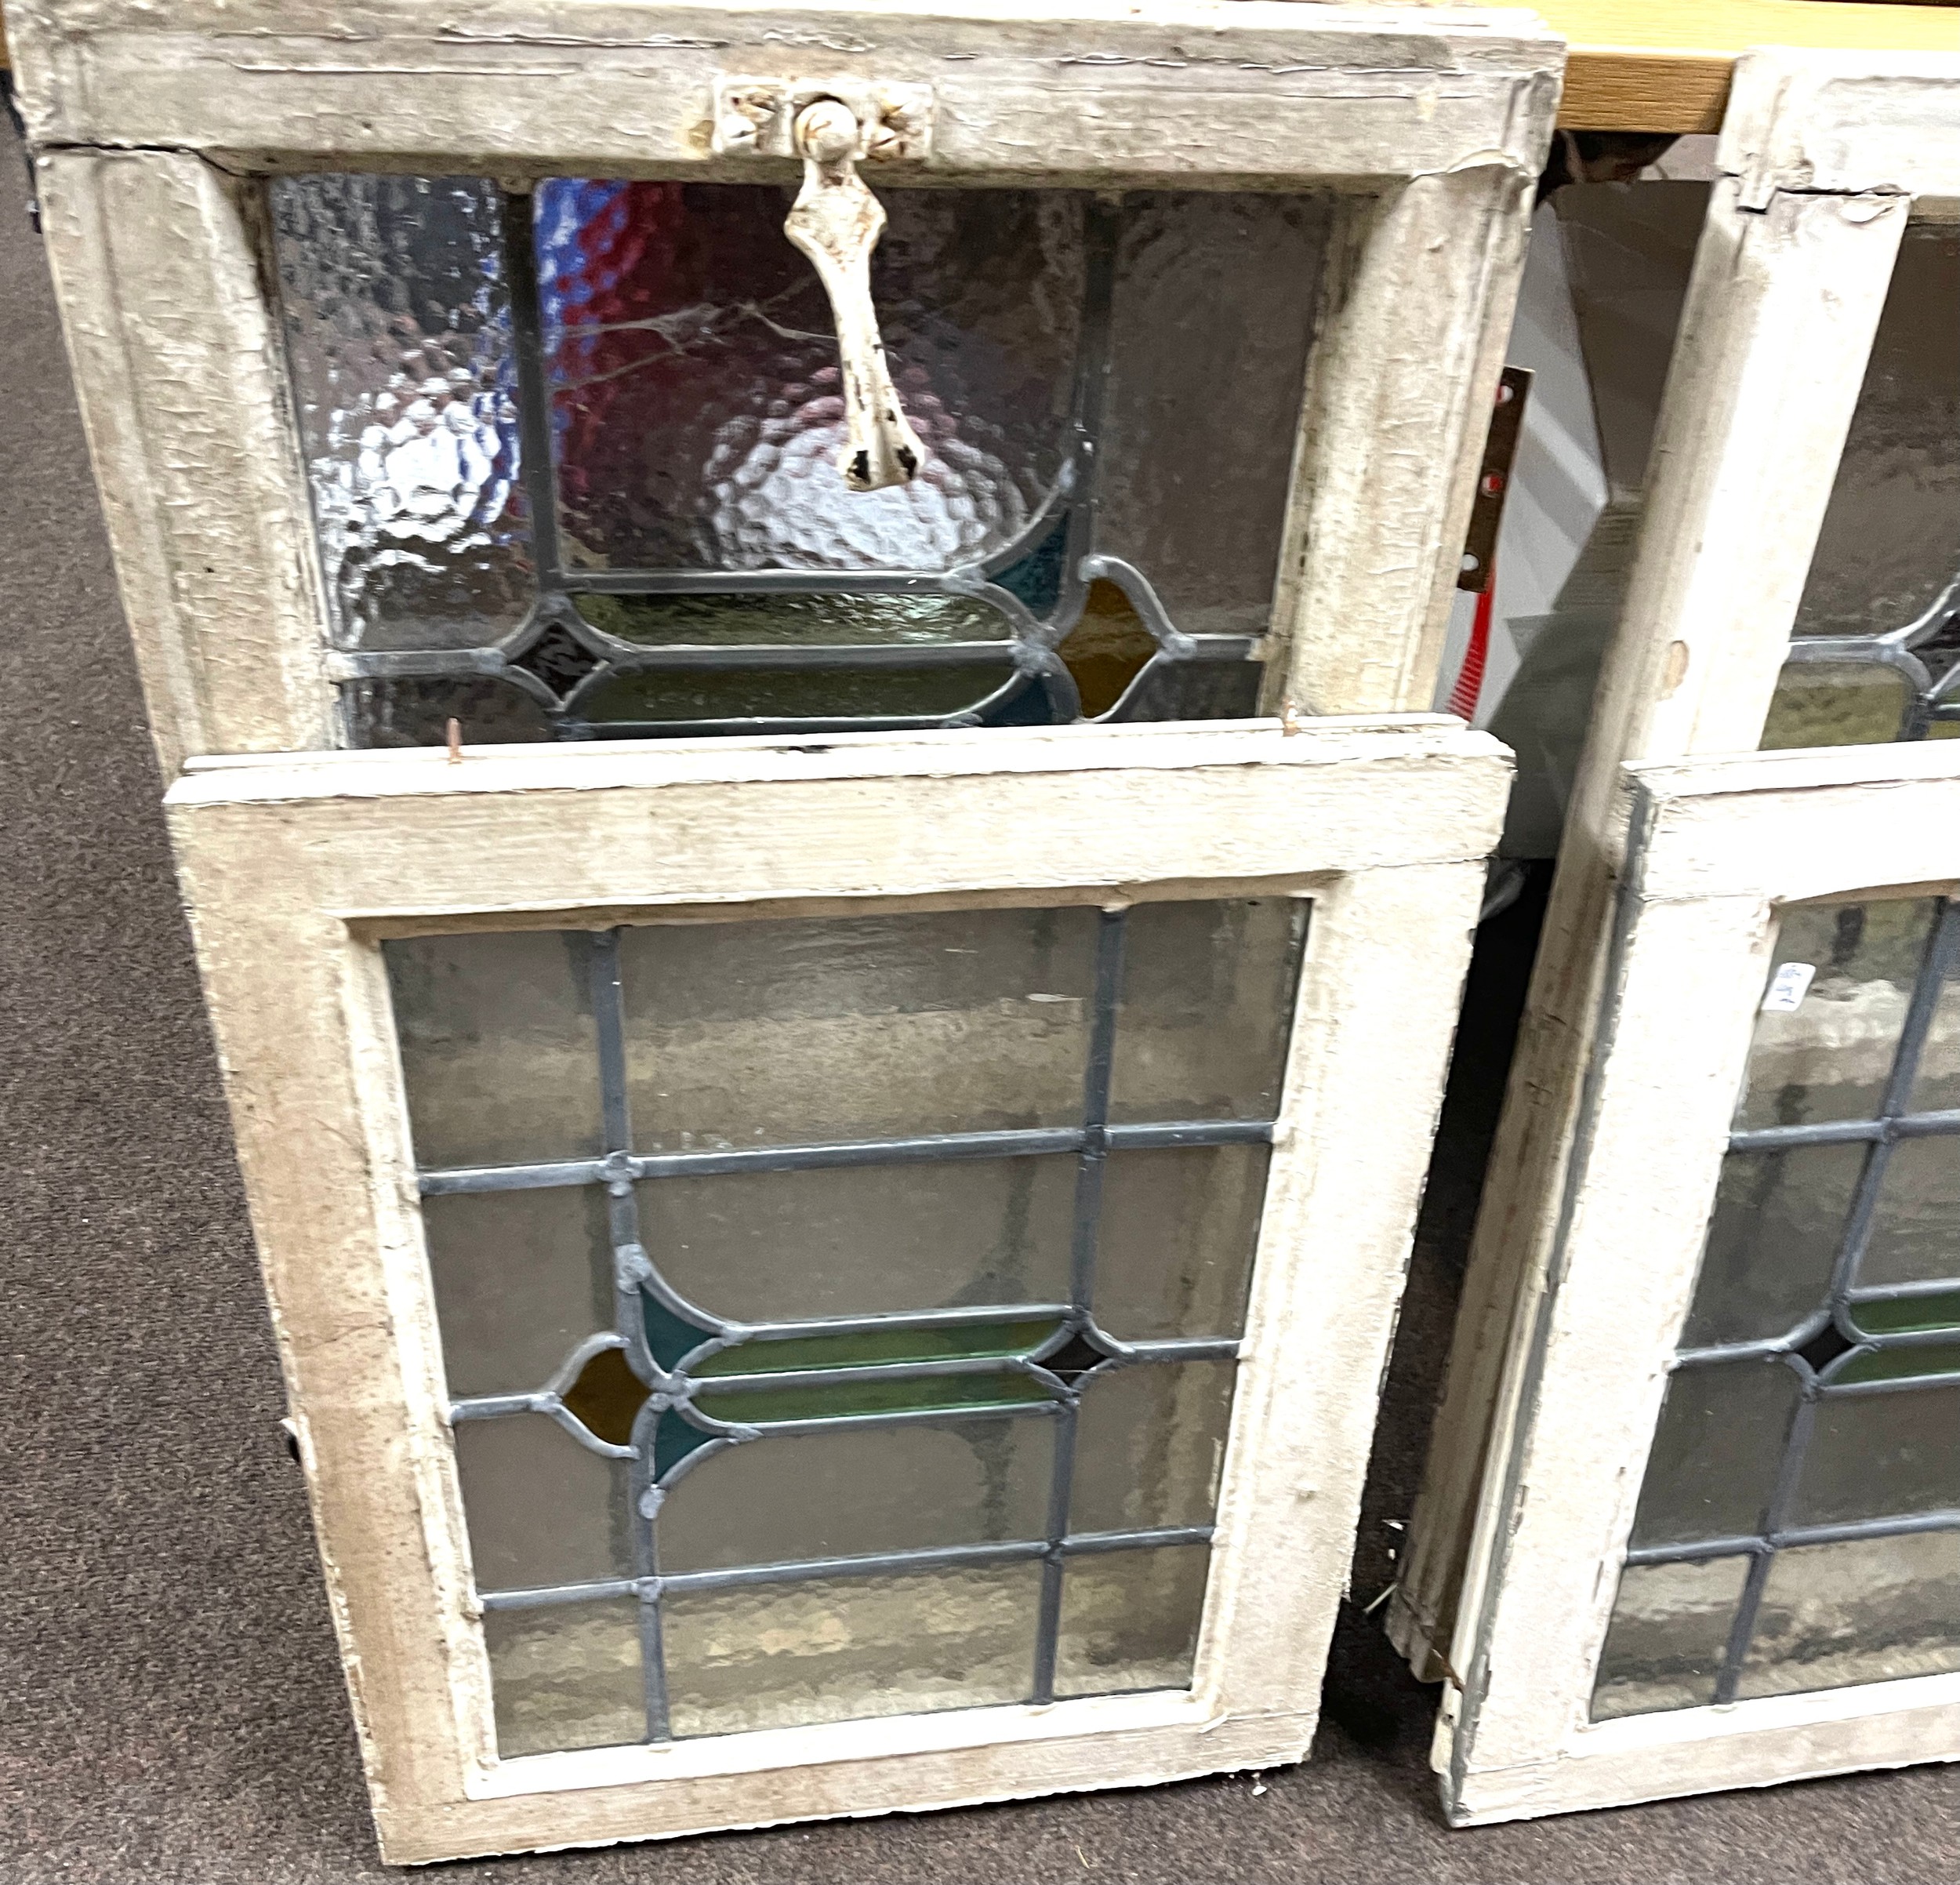 4 Pieces of leaded glass window, largest measures 28 inches by 17 inches - Image 2 of 3